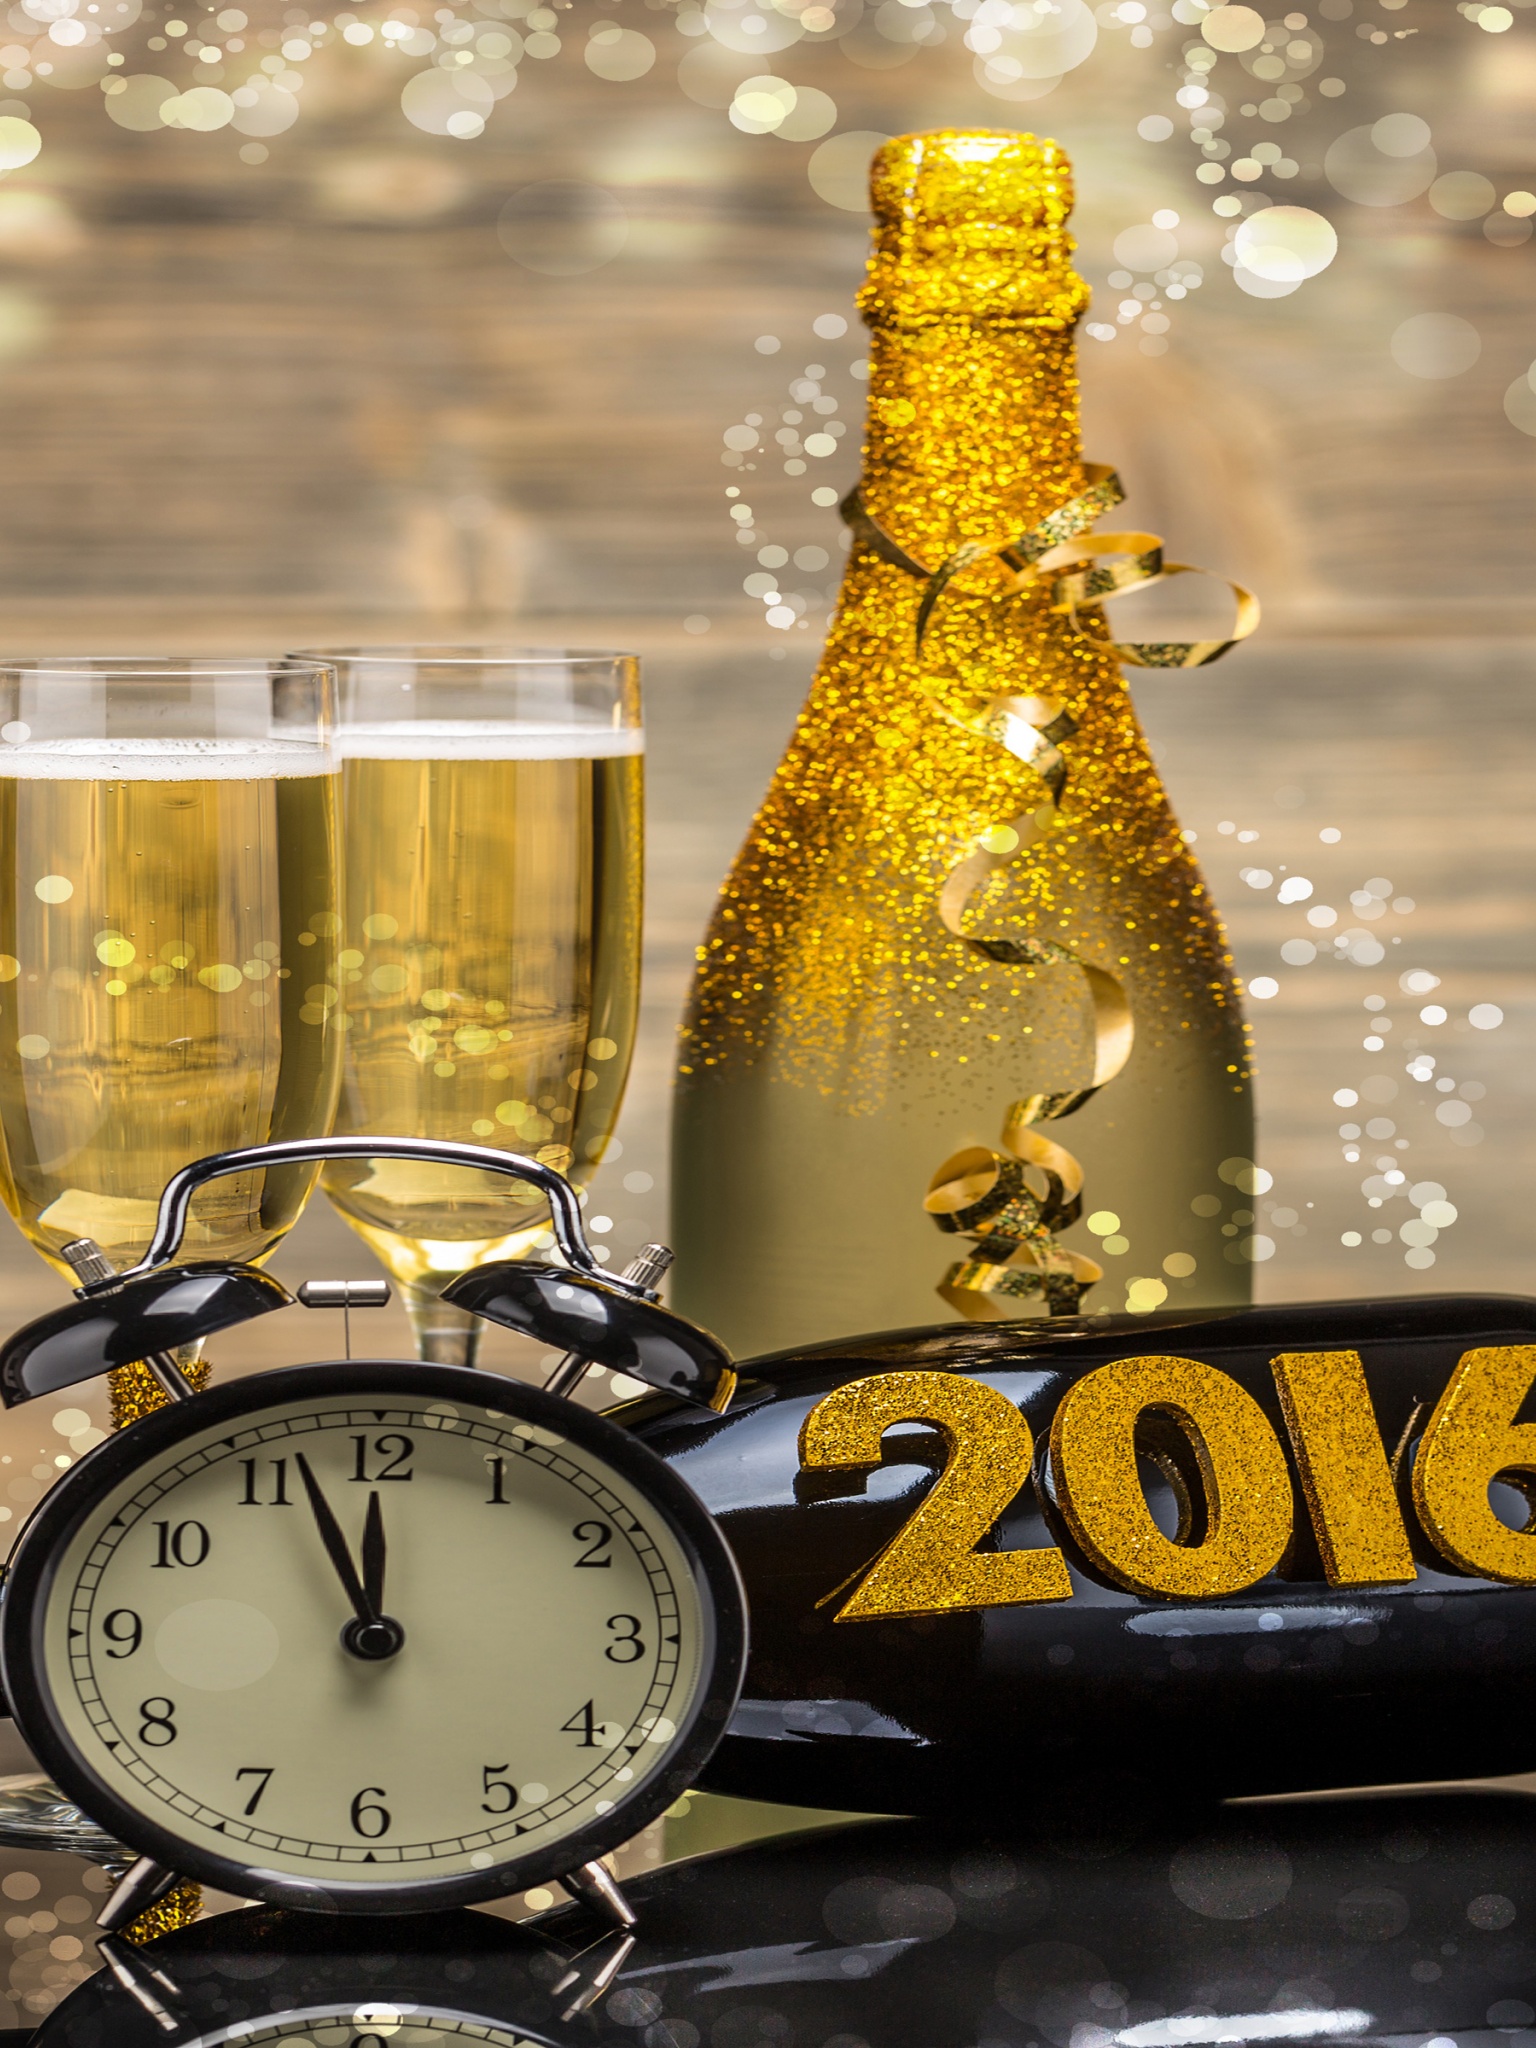 New Year 2016 Champagne Clock Bottle